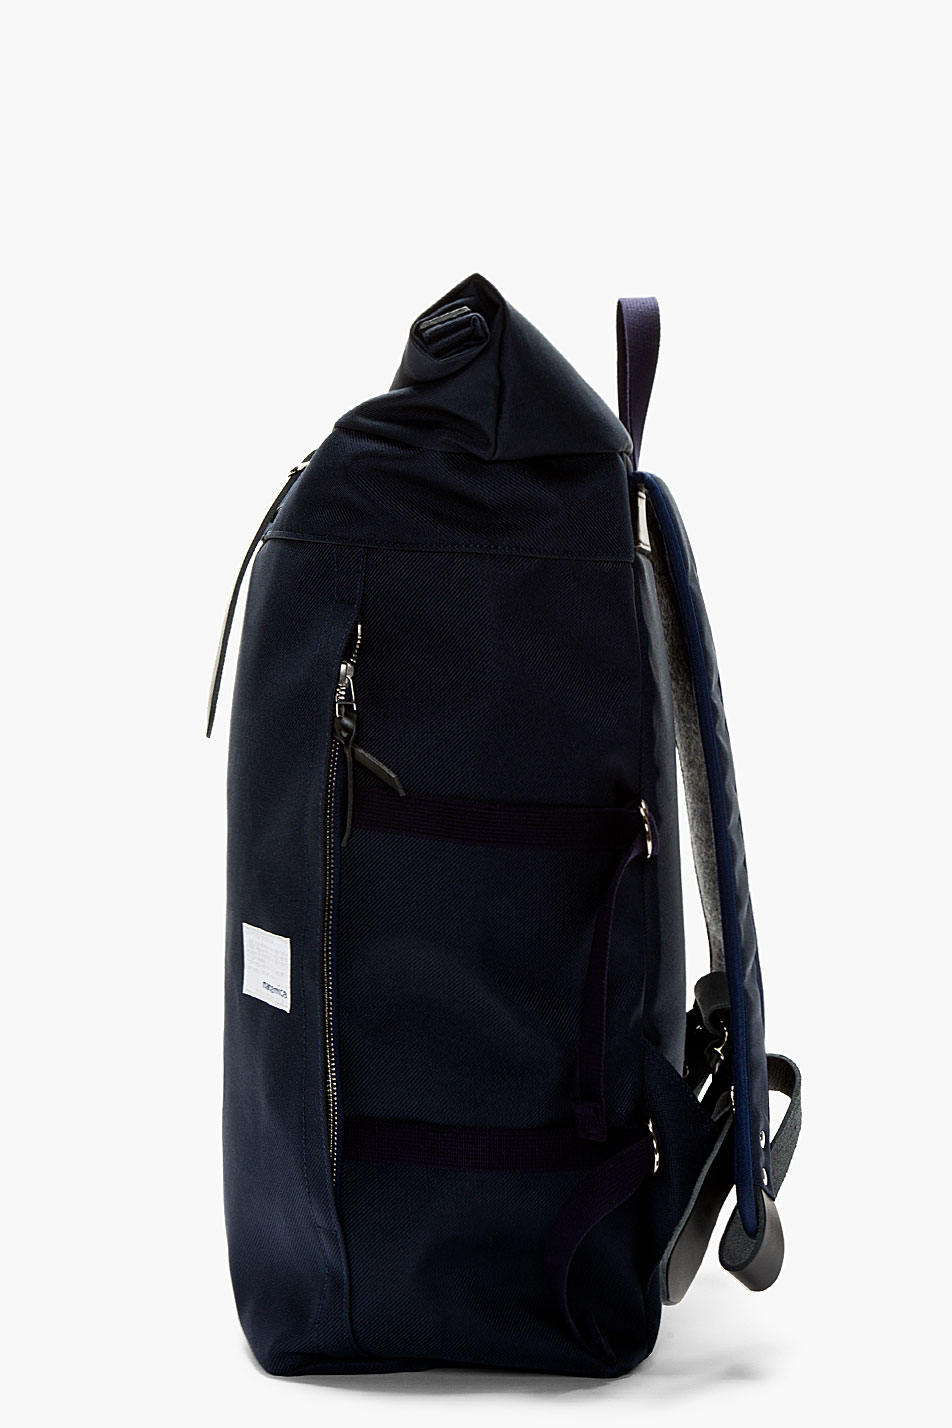 Lyst - Nanamica Navy Roll_top Cycling Backpack in Blue for Men